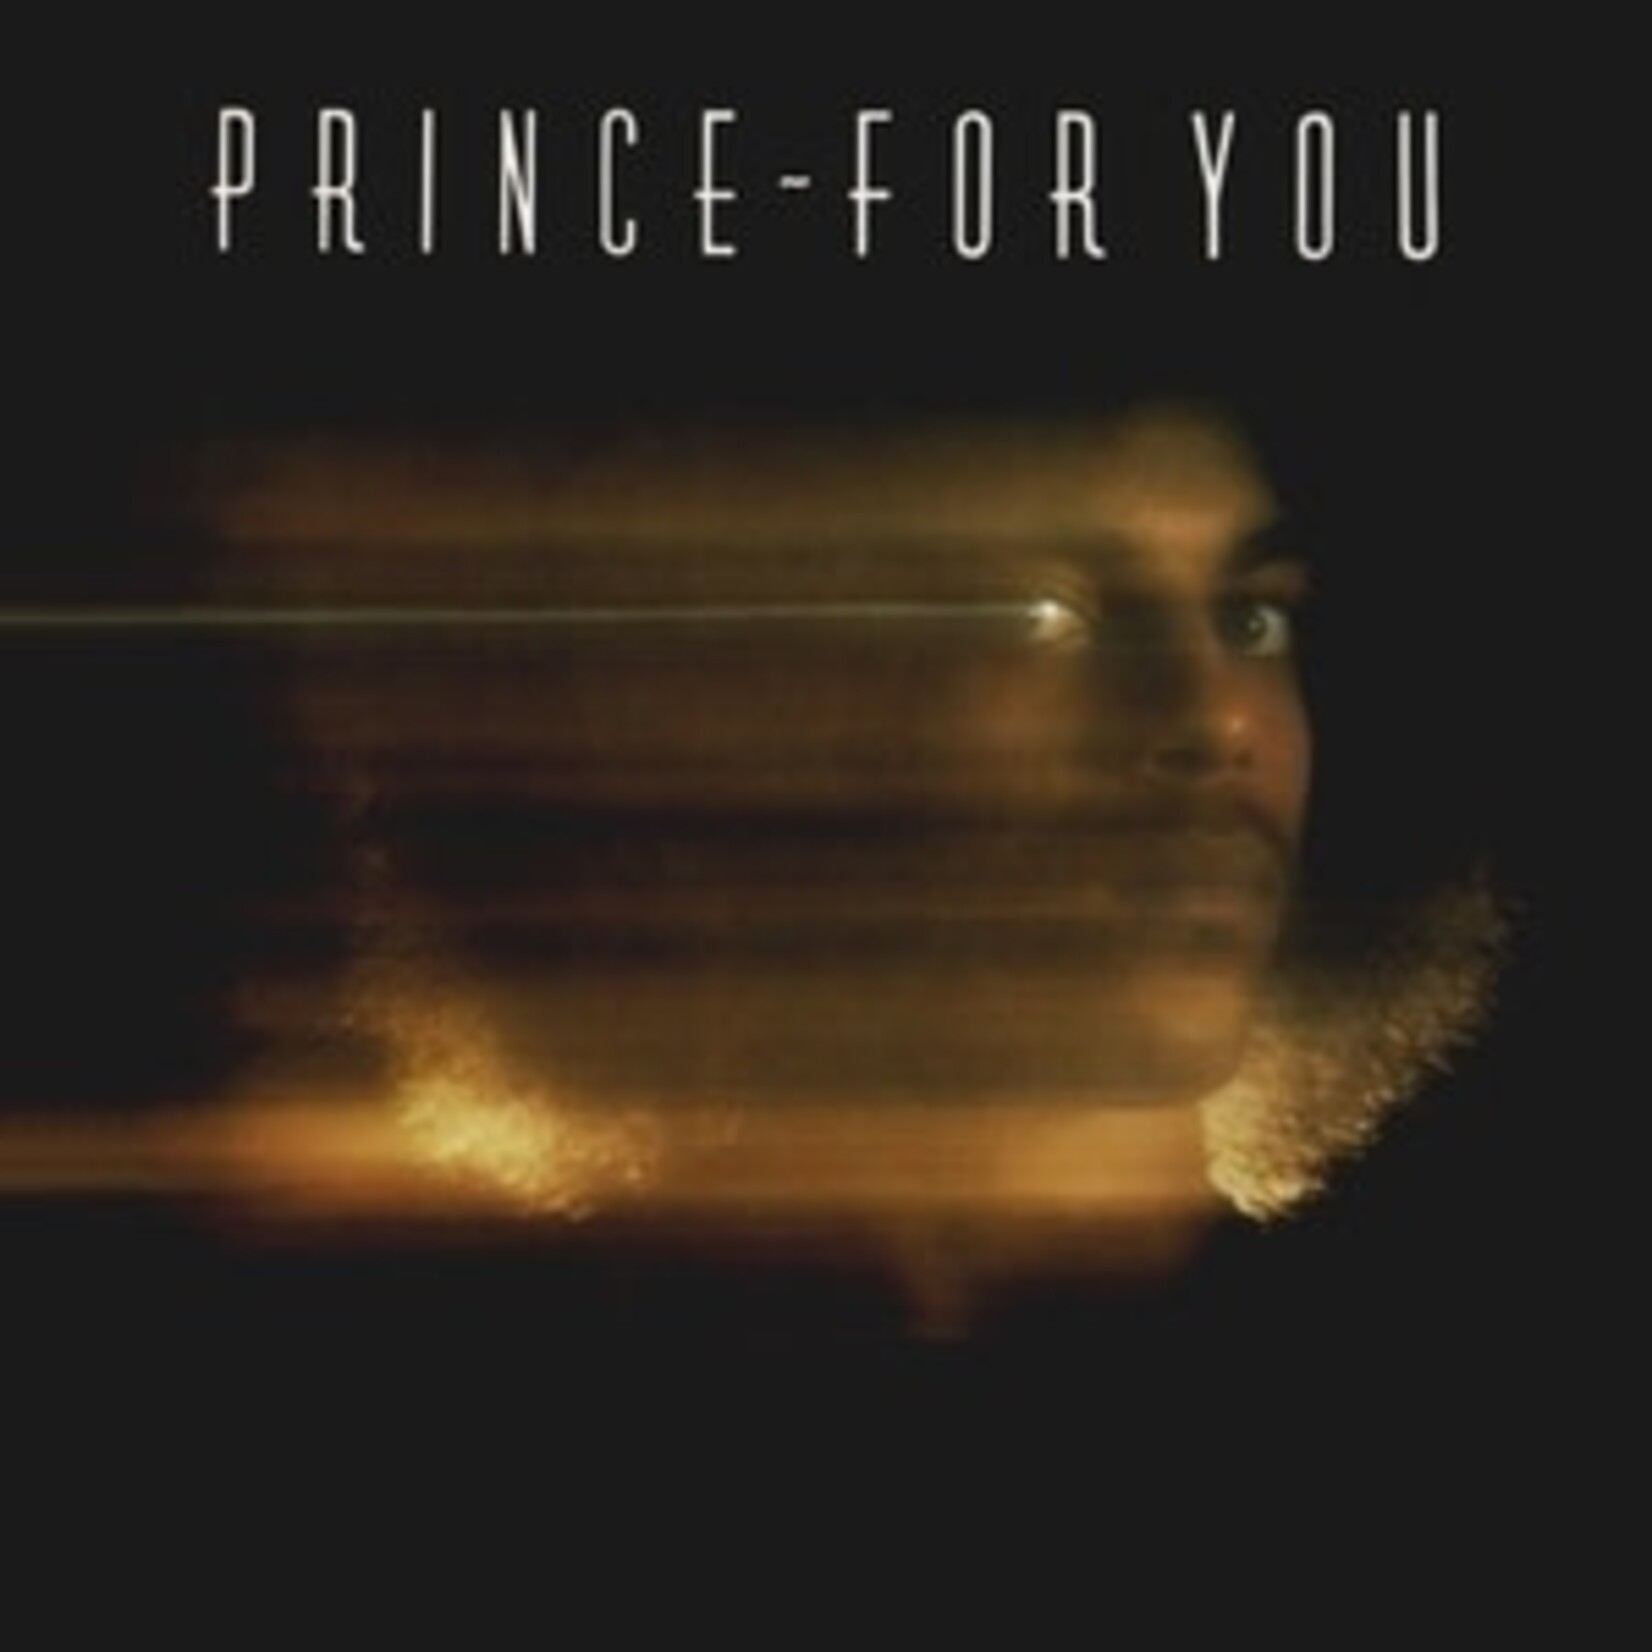 [New] Prince - For You